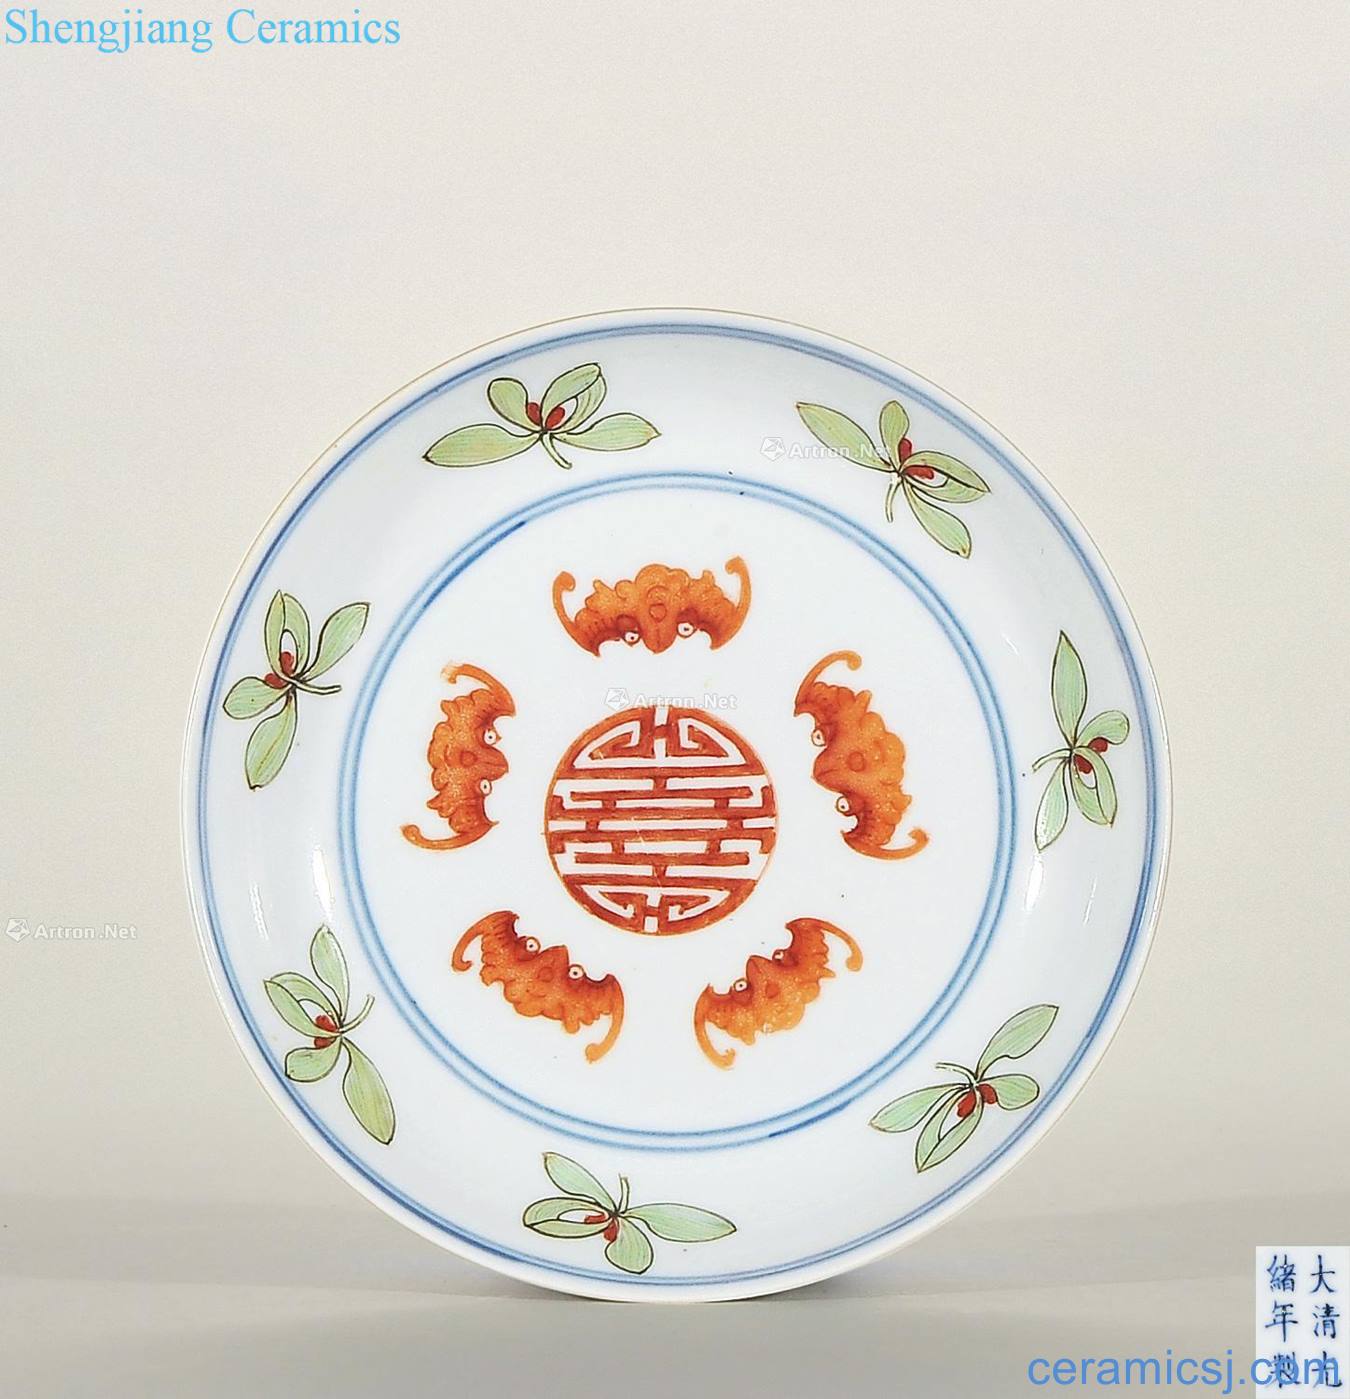 Pastel reign of qing emperor guangxu wufu long-lived plate